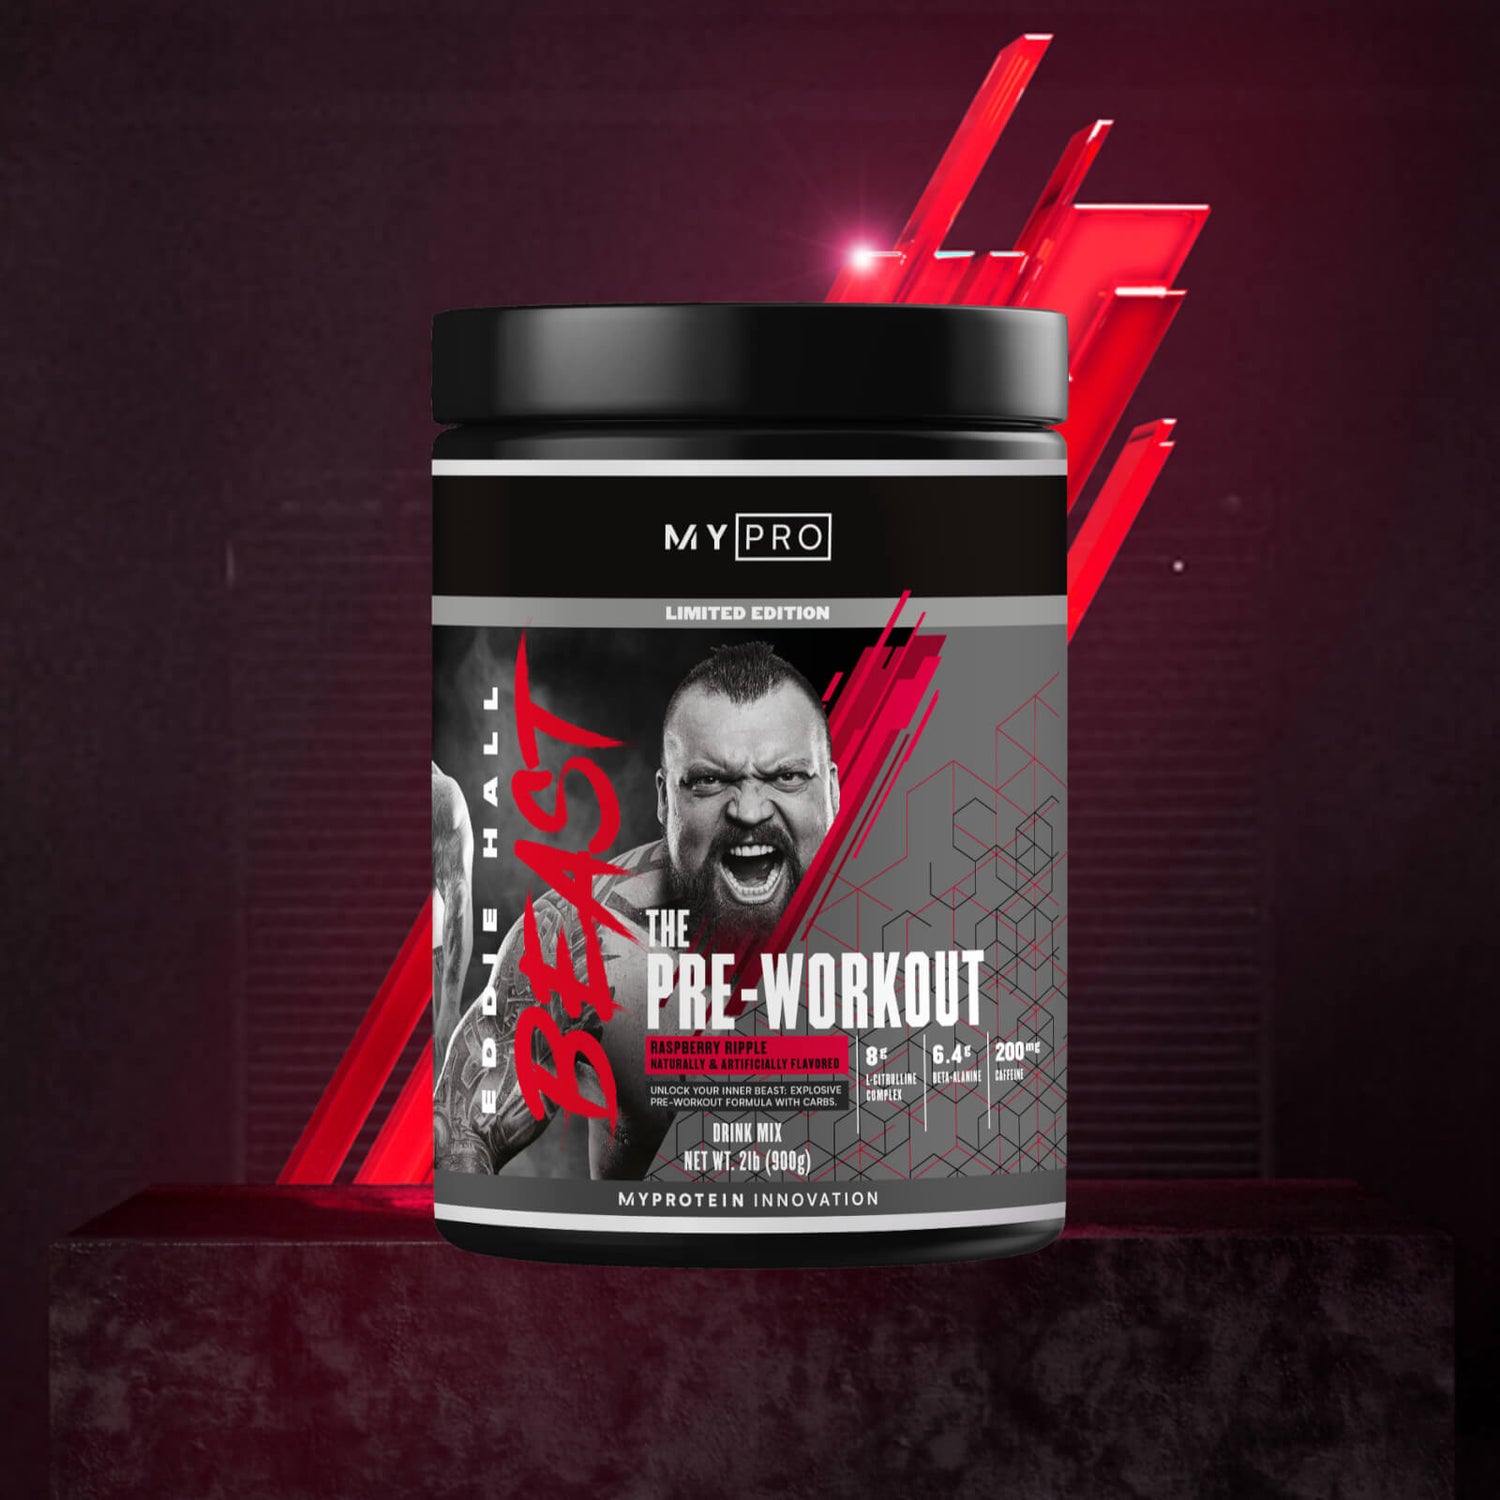 THE Pre-Workout — Eddie Hall